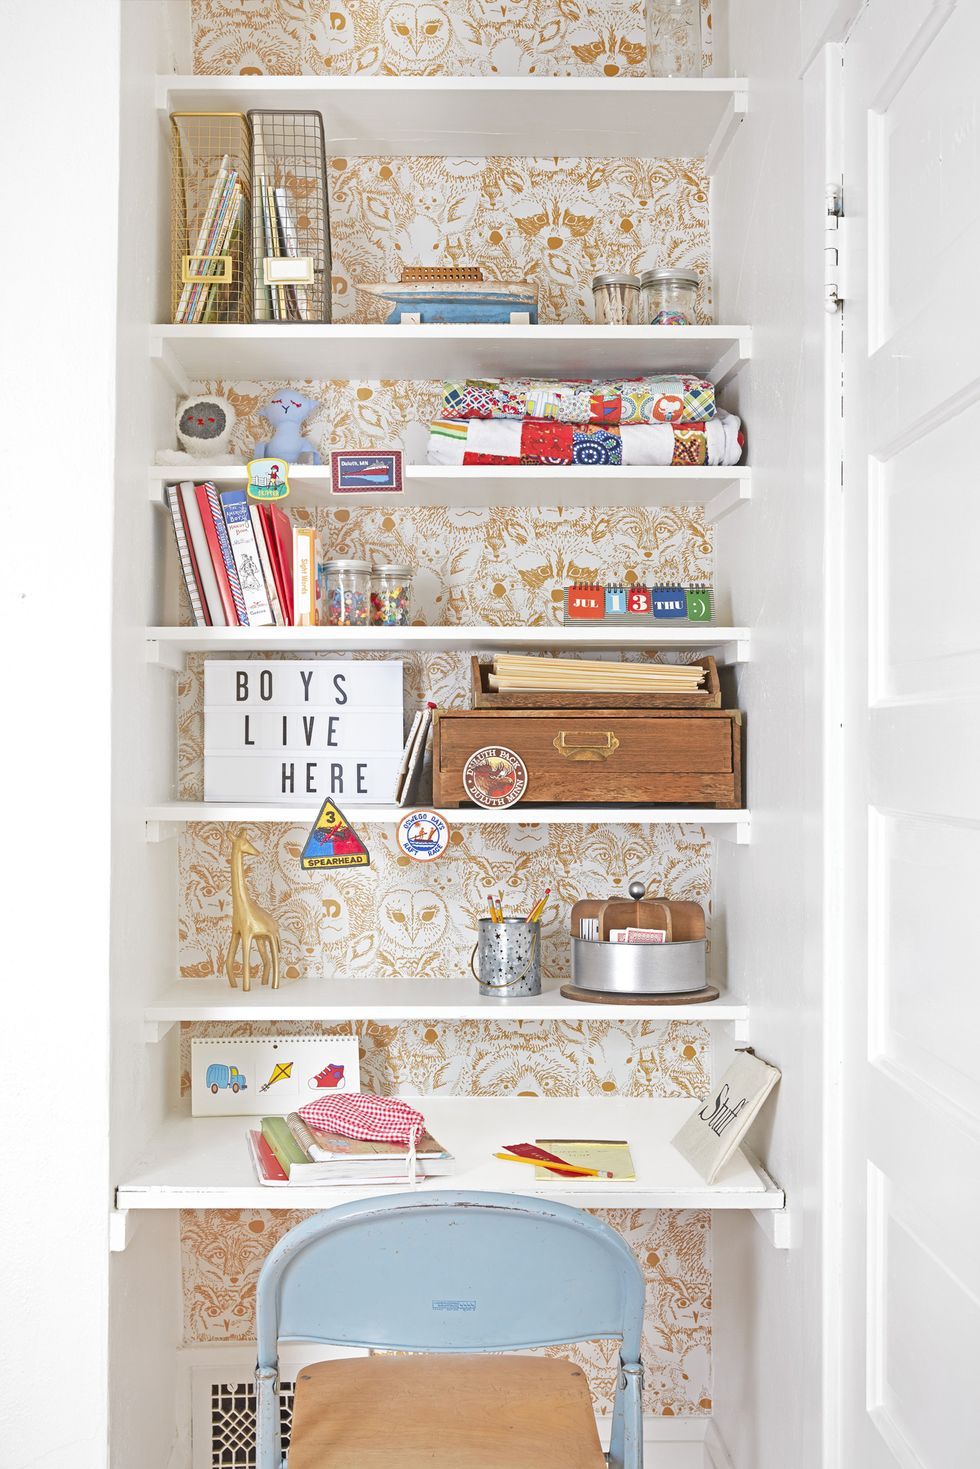 Simplified Bee Tips for Styling a Bookcase Like an Interior Designer